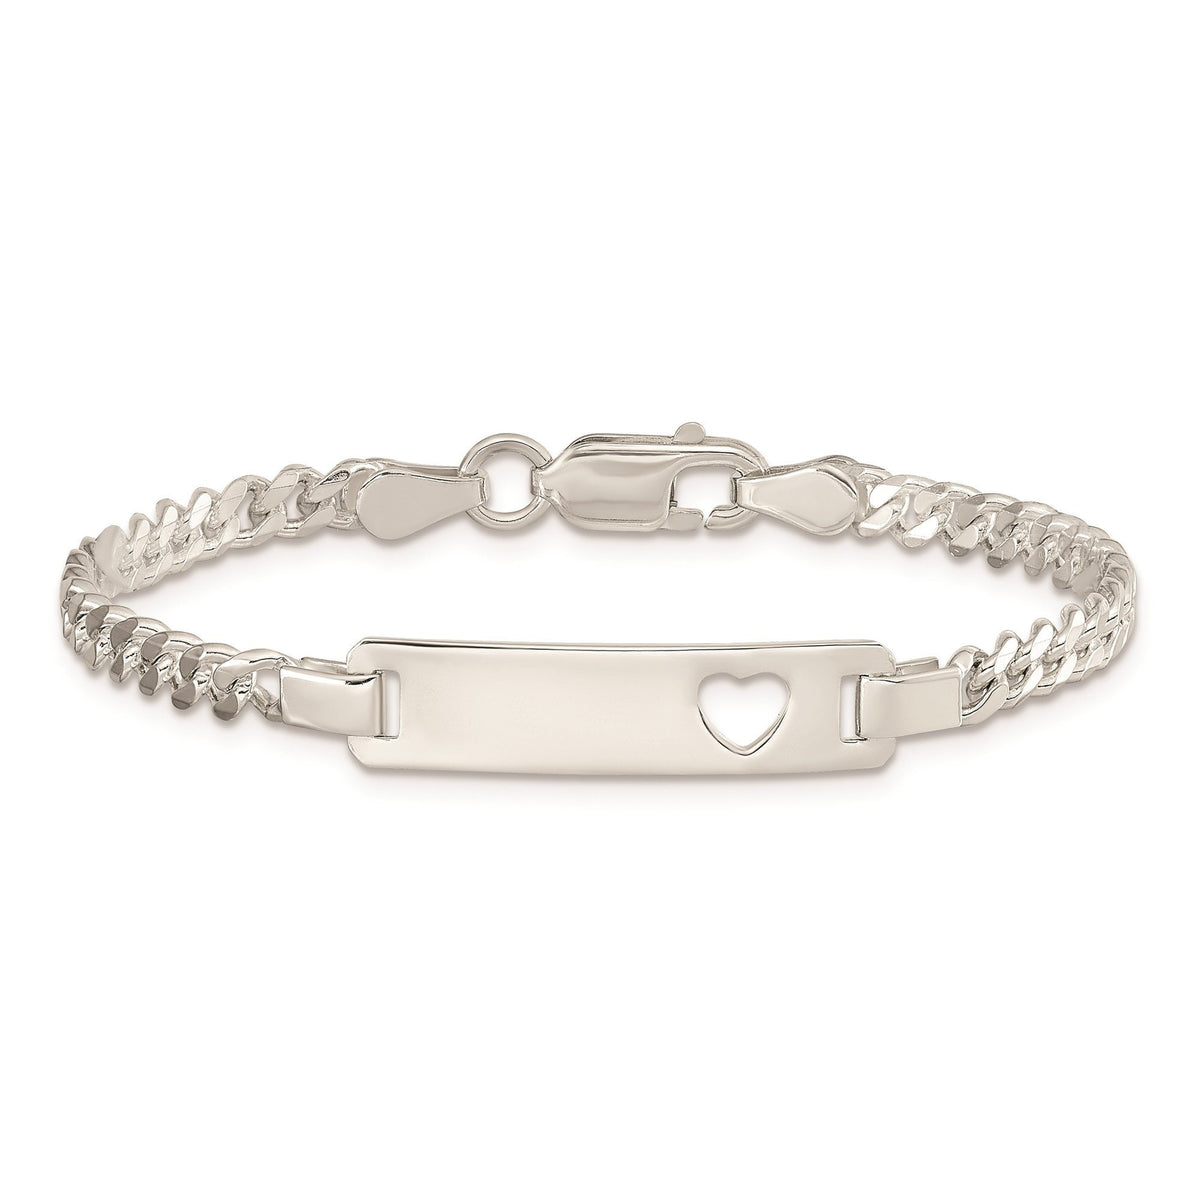 Children's Sterling Silver Personalized ID Cuban Bracelet - 5.5 inches & 6 inches  ENGRAVING  6 months -7 Years Old - Gift Box Included